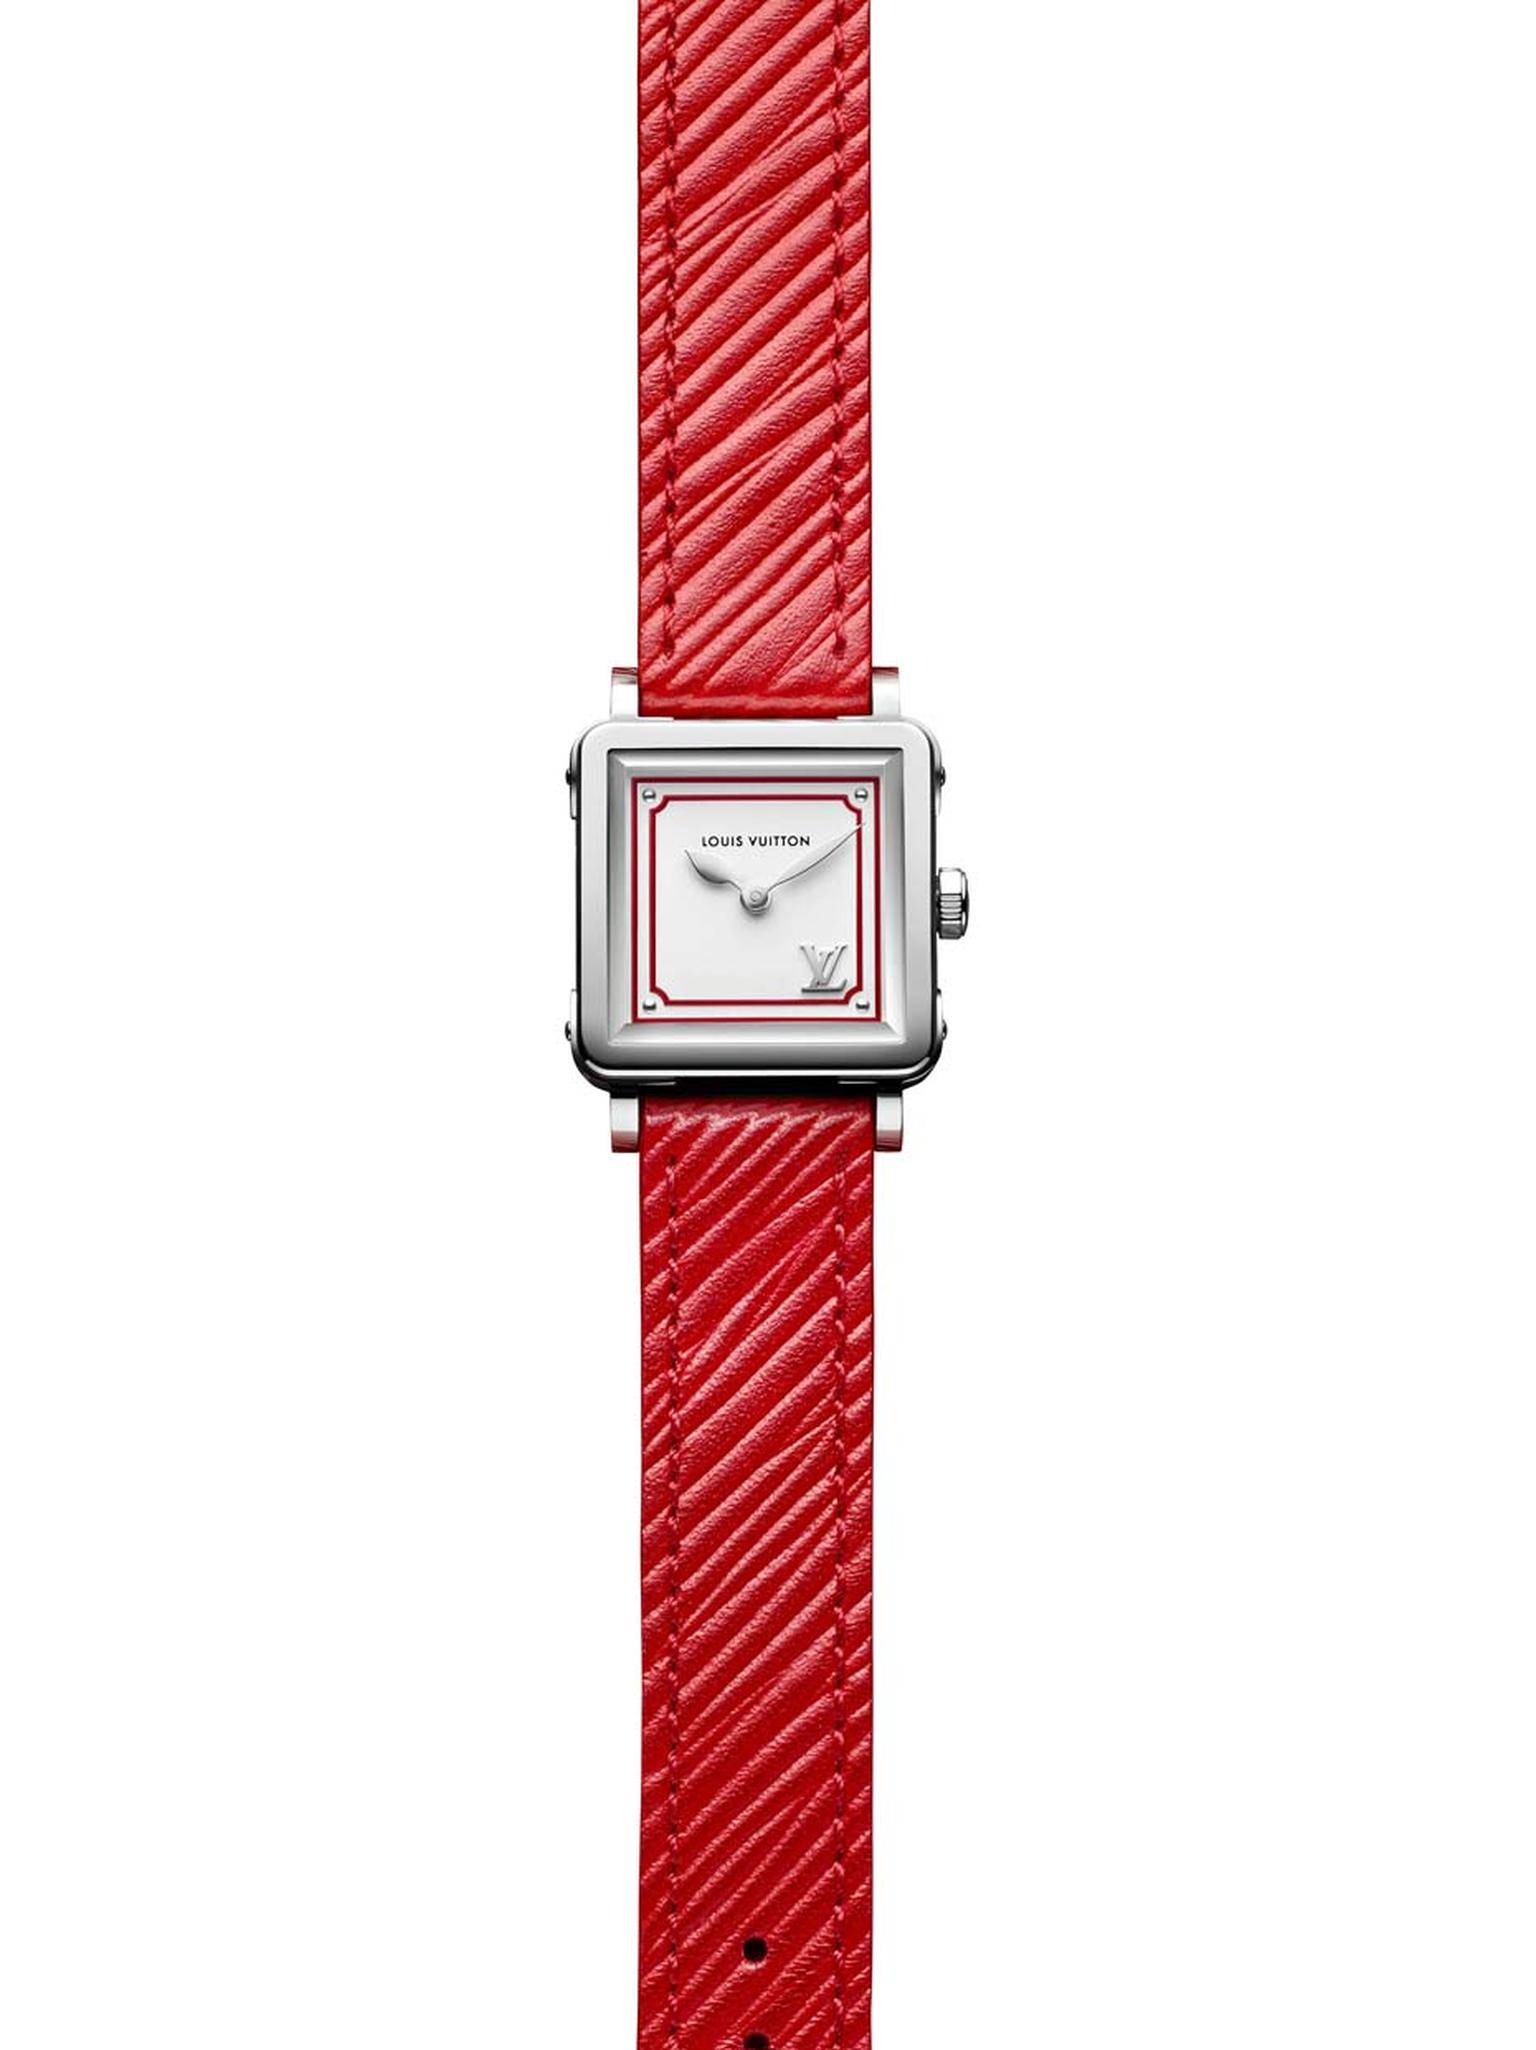 Louis Vuitton's new Emprise Epi watch - directly inspired by the famous steamer trunks - has had a revamp thanks to Nicolas Ghesquière, inspired by his Summer 2015 leather goods collection. This poppy red version has a steel case, silver opaline dial and 